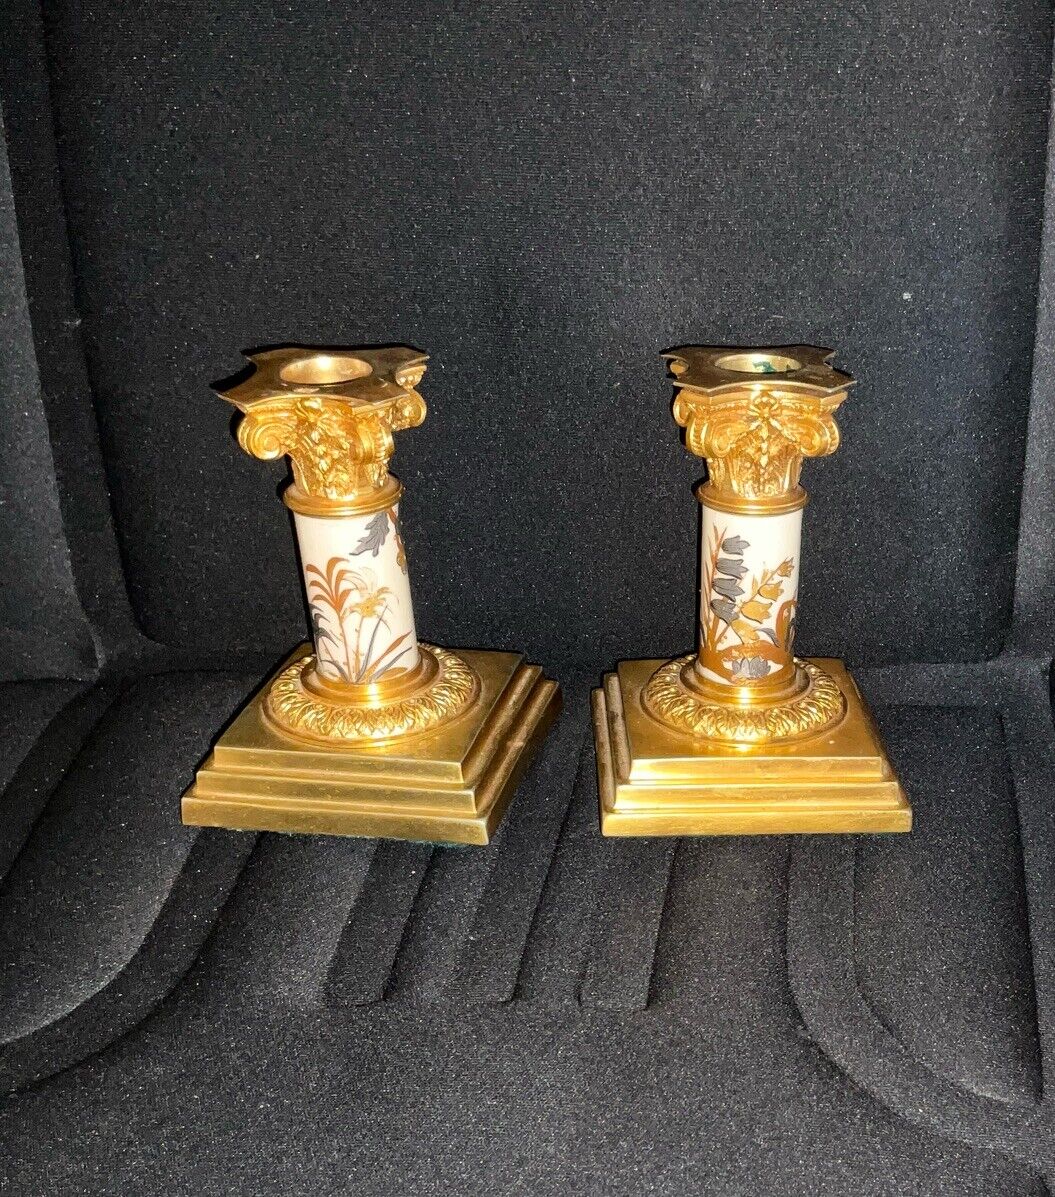 Antique Pair Ornate CONTINENTAL Porcelain/Bronze Candle Holders